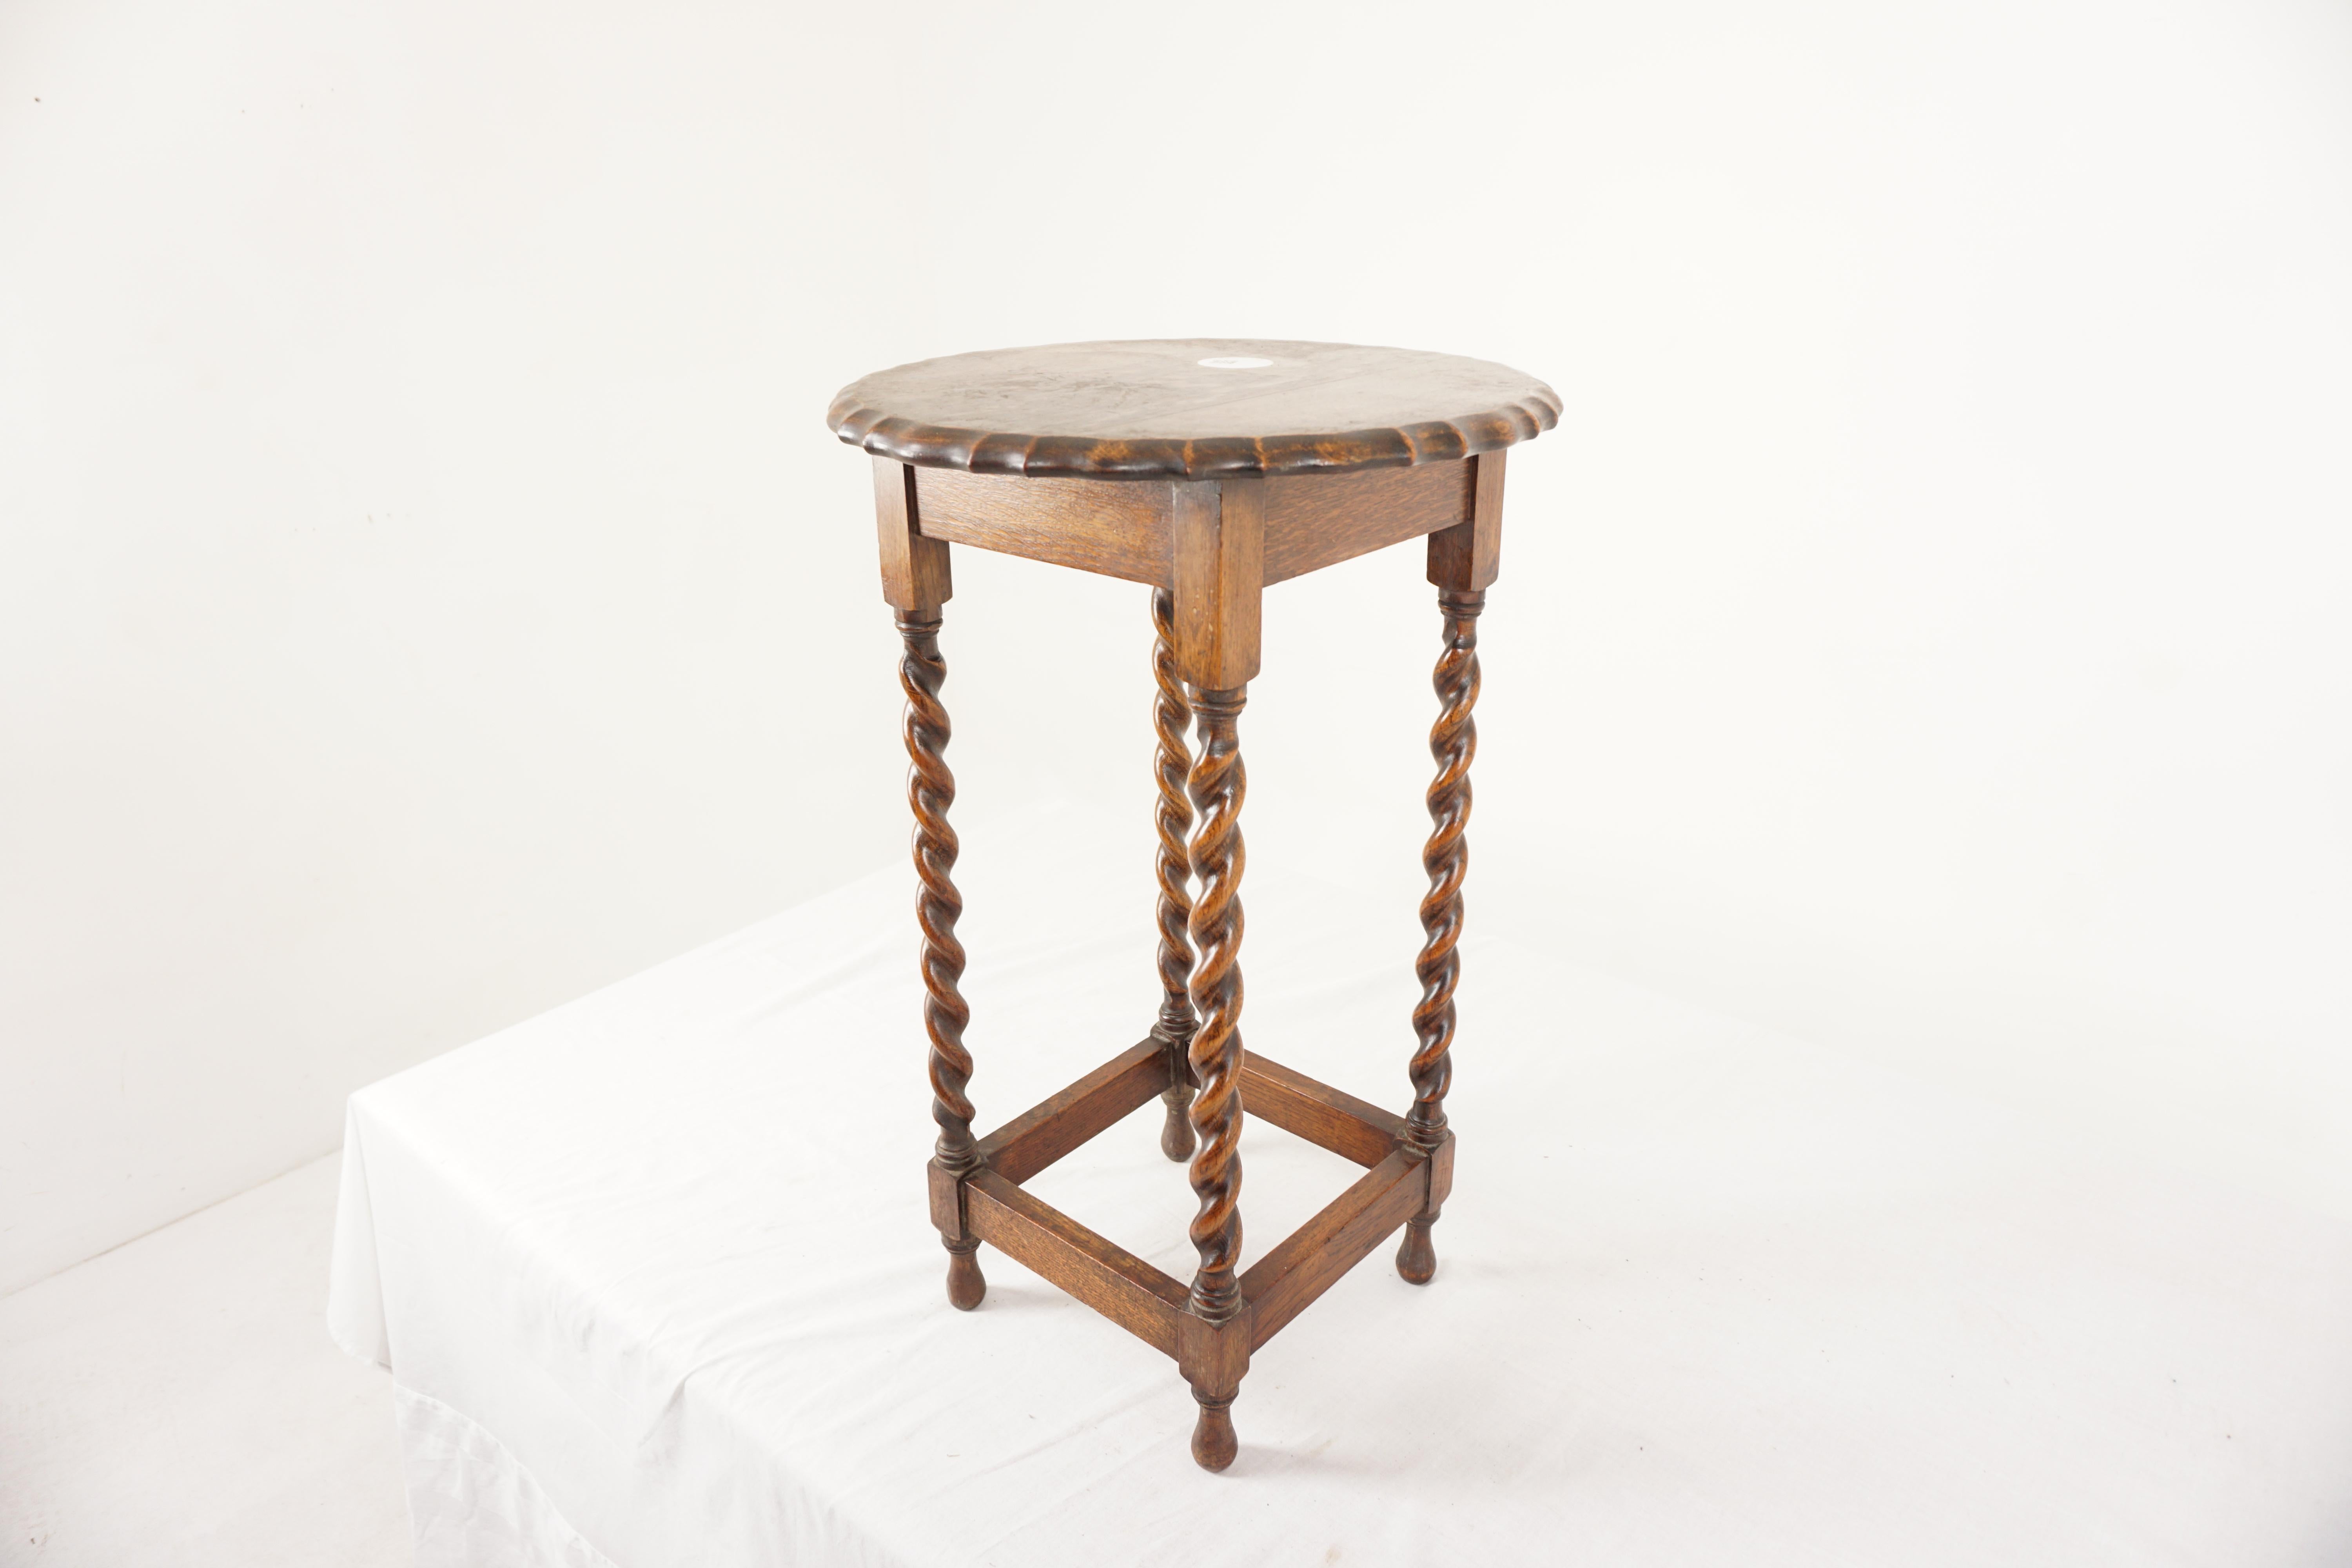 Vintage Oak Table, Circular Oak Barley Twist Lamp Table, Sofa Table, Antique Furniture, Scotland 1930, H1126

+ Scotland 1930
+ Solid Oak
+ Original Finish
+ Circular solid top 
+ With a nice pie crust edge
+ All supported by four barley